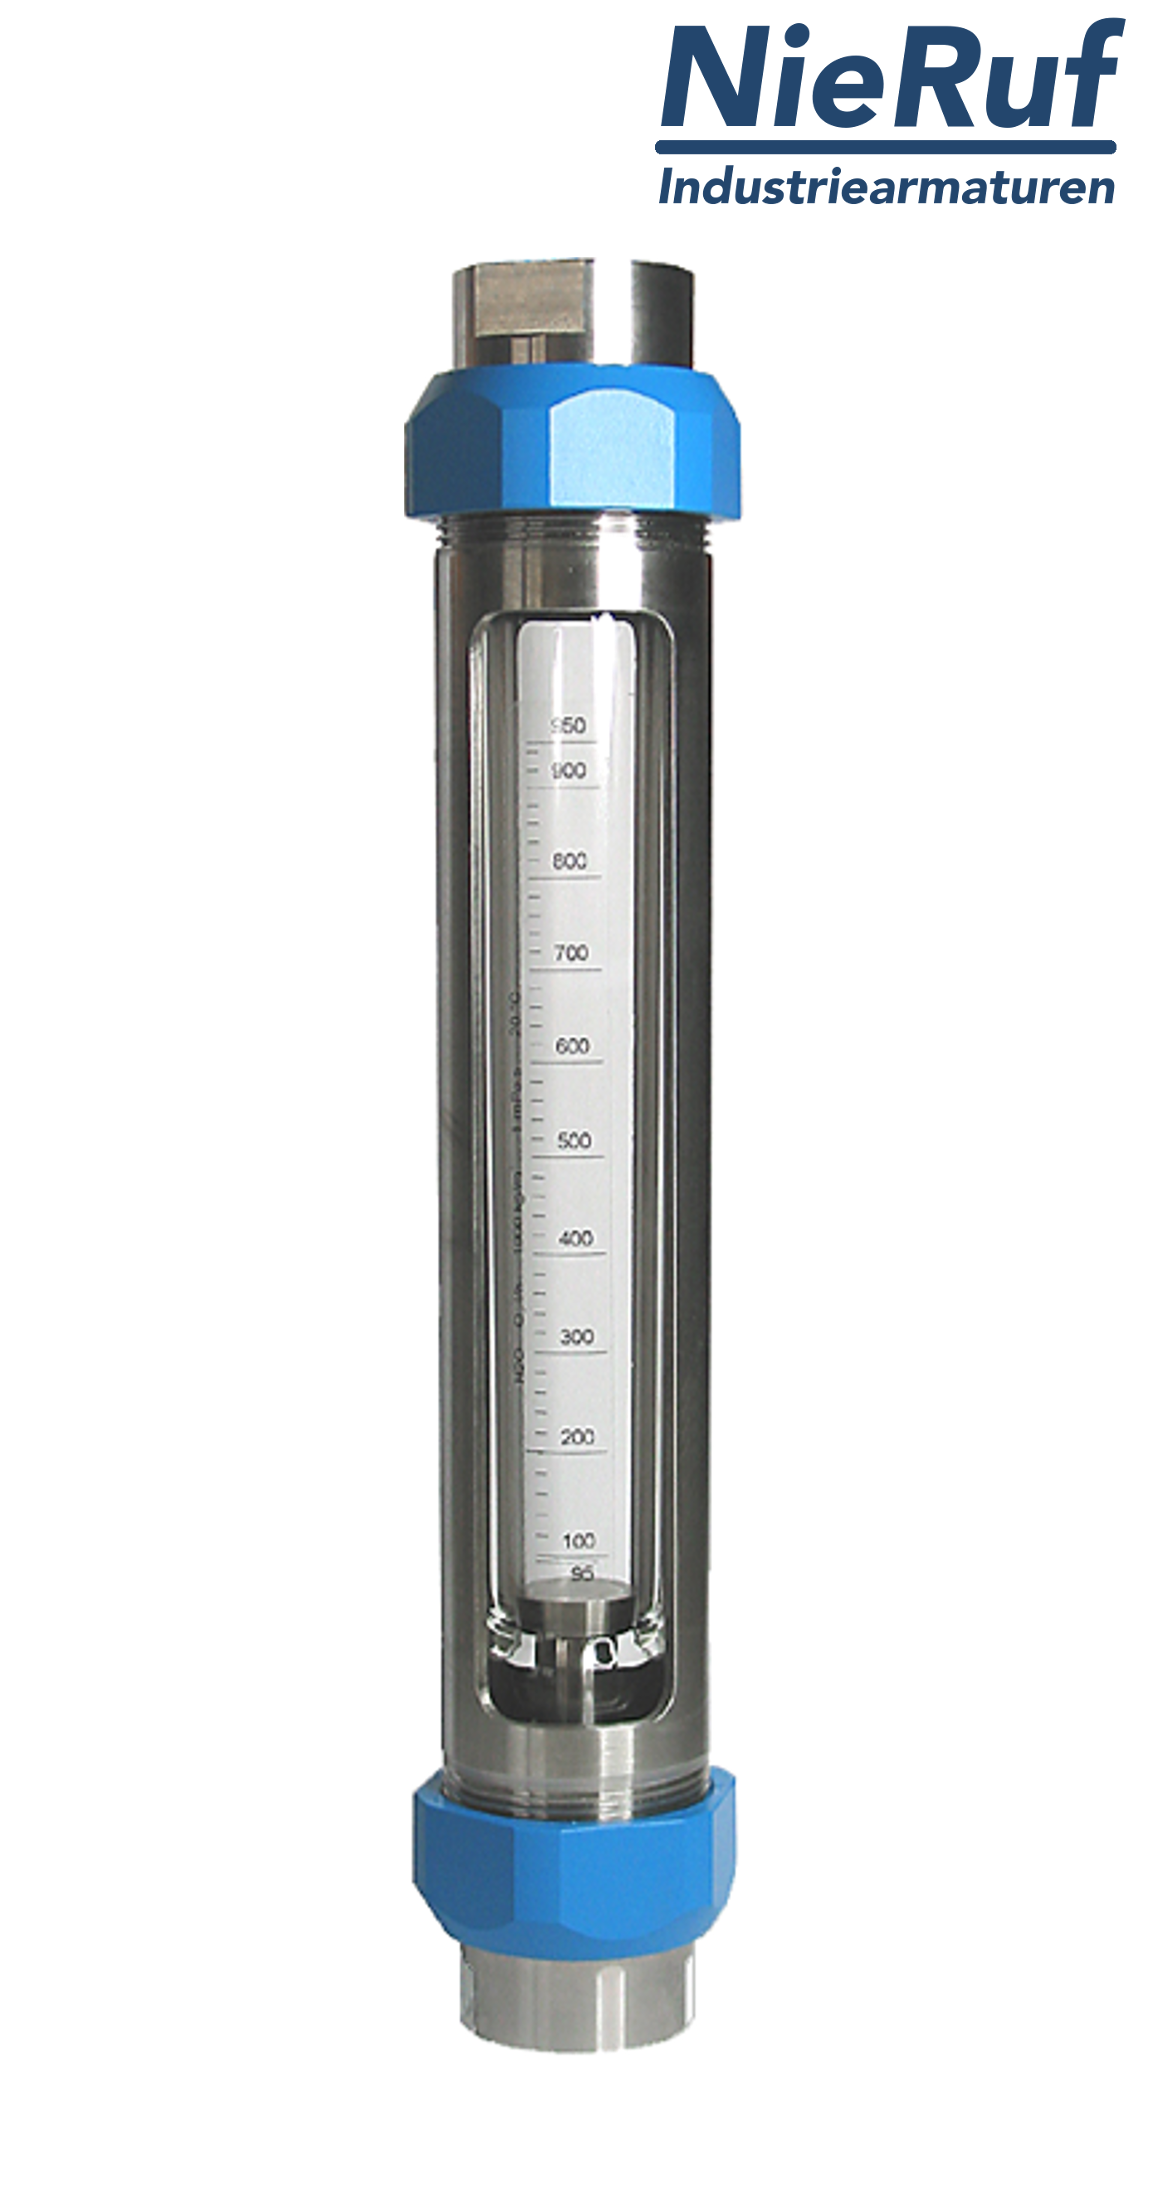 Variable area flowmeter stainless steel + borosilicate 1/2" inch 300.0 - 3000 l/h water FKM